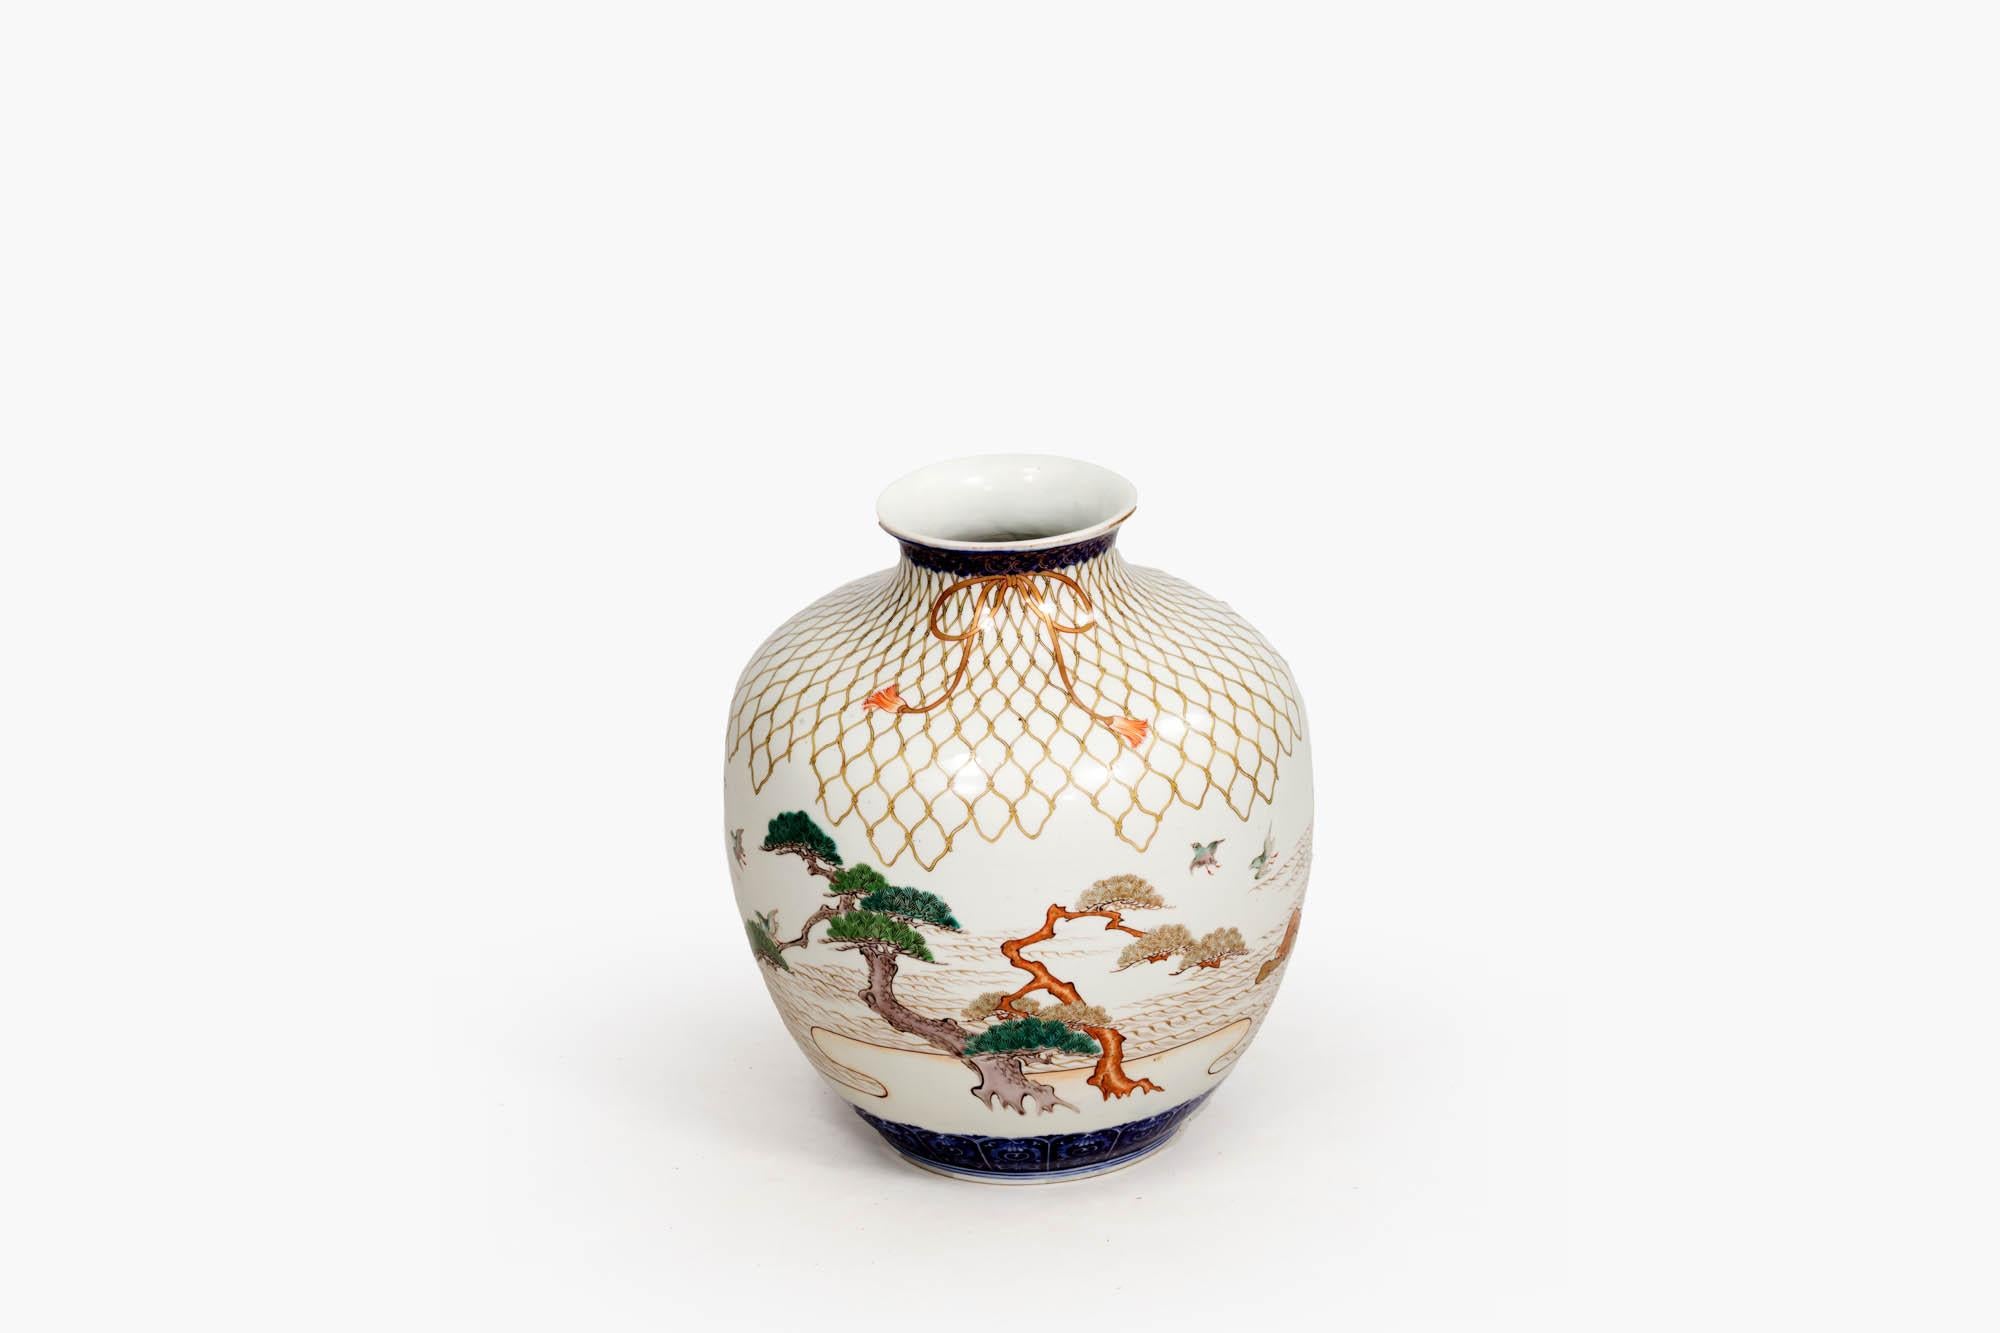 Late 19th century Chinese ceramic vase in the Japanese style, bulbous in shape with painted naturalistic detailing of trees, water, and birds. Solid deep blue banding highlights the neck and lower section towards the base, with a delicate hand